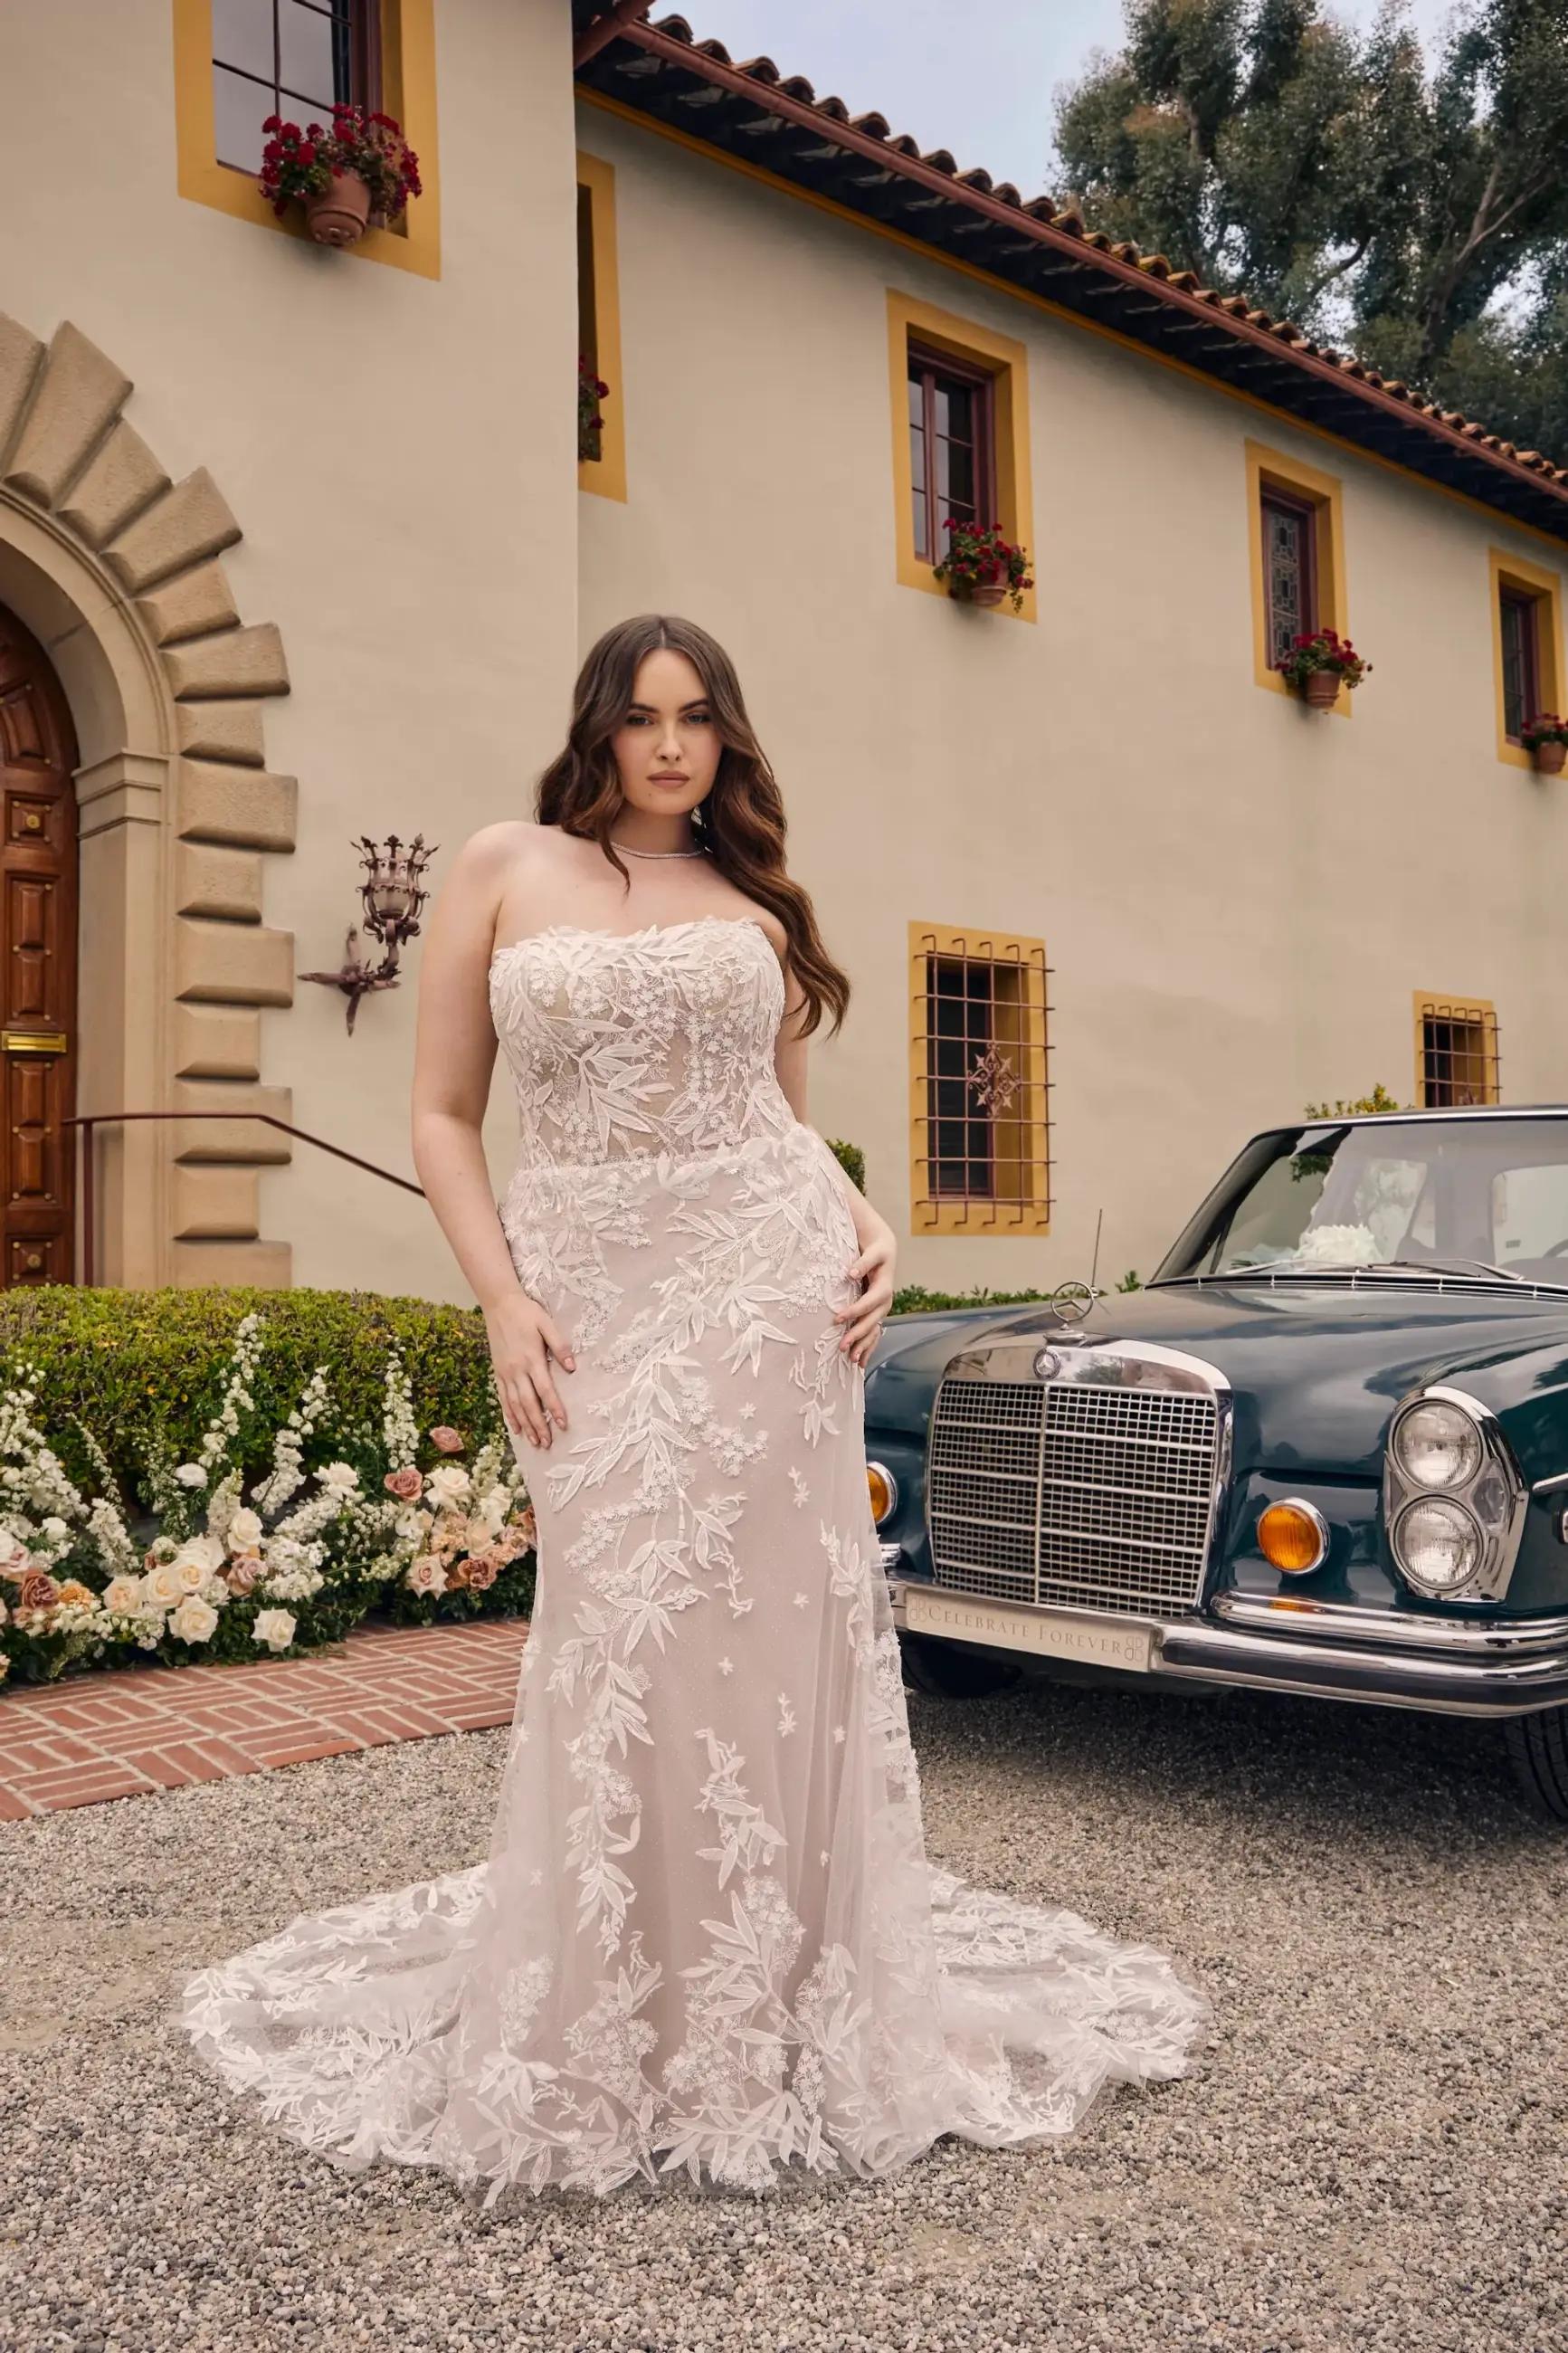 Curvy Bridal Fashion Trends: What&#39;s In for the Modern Plus-Size Bride Image